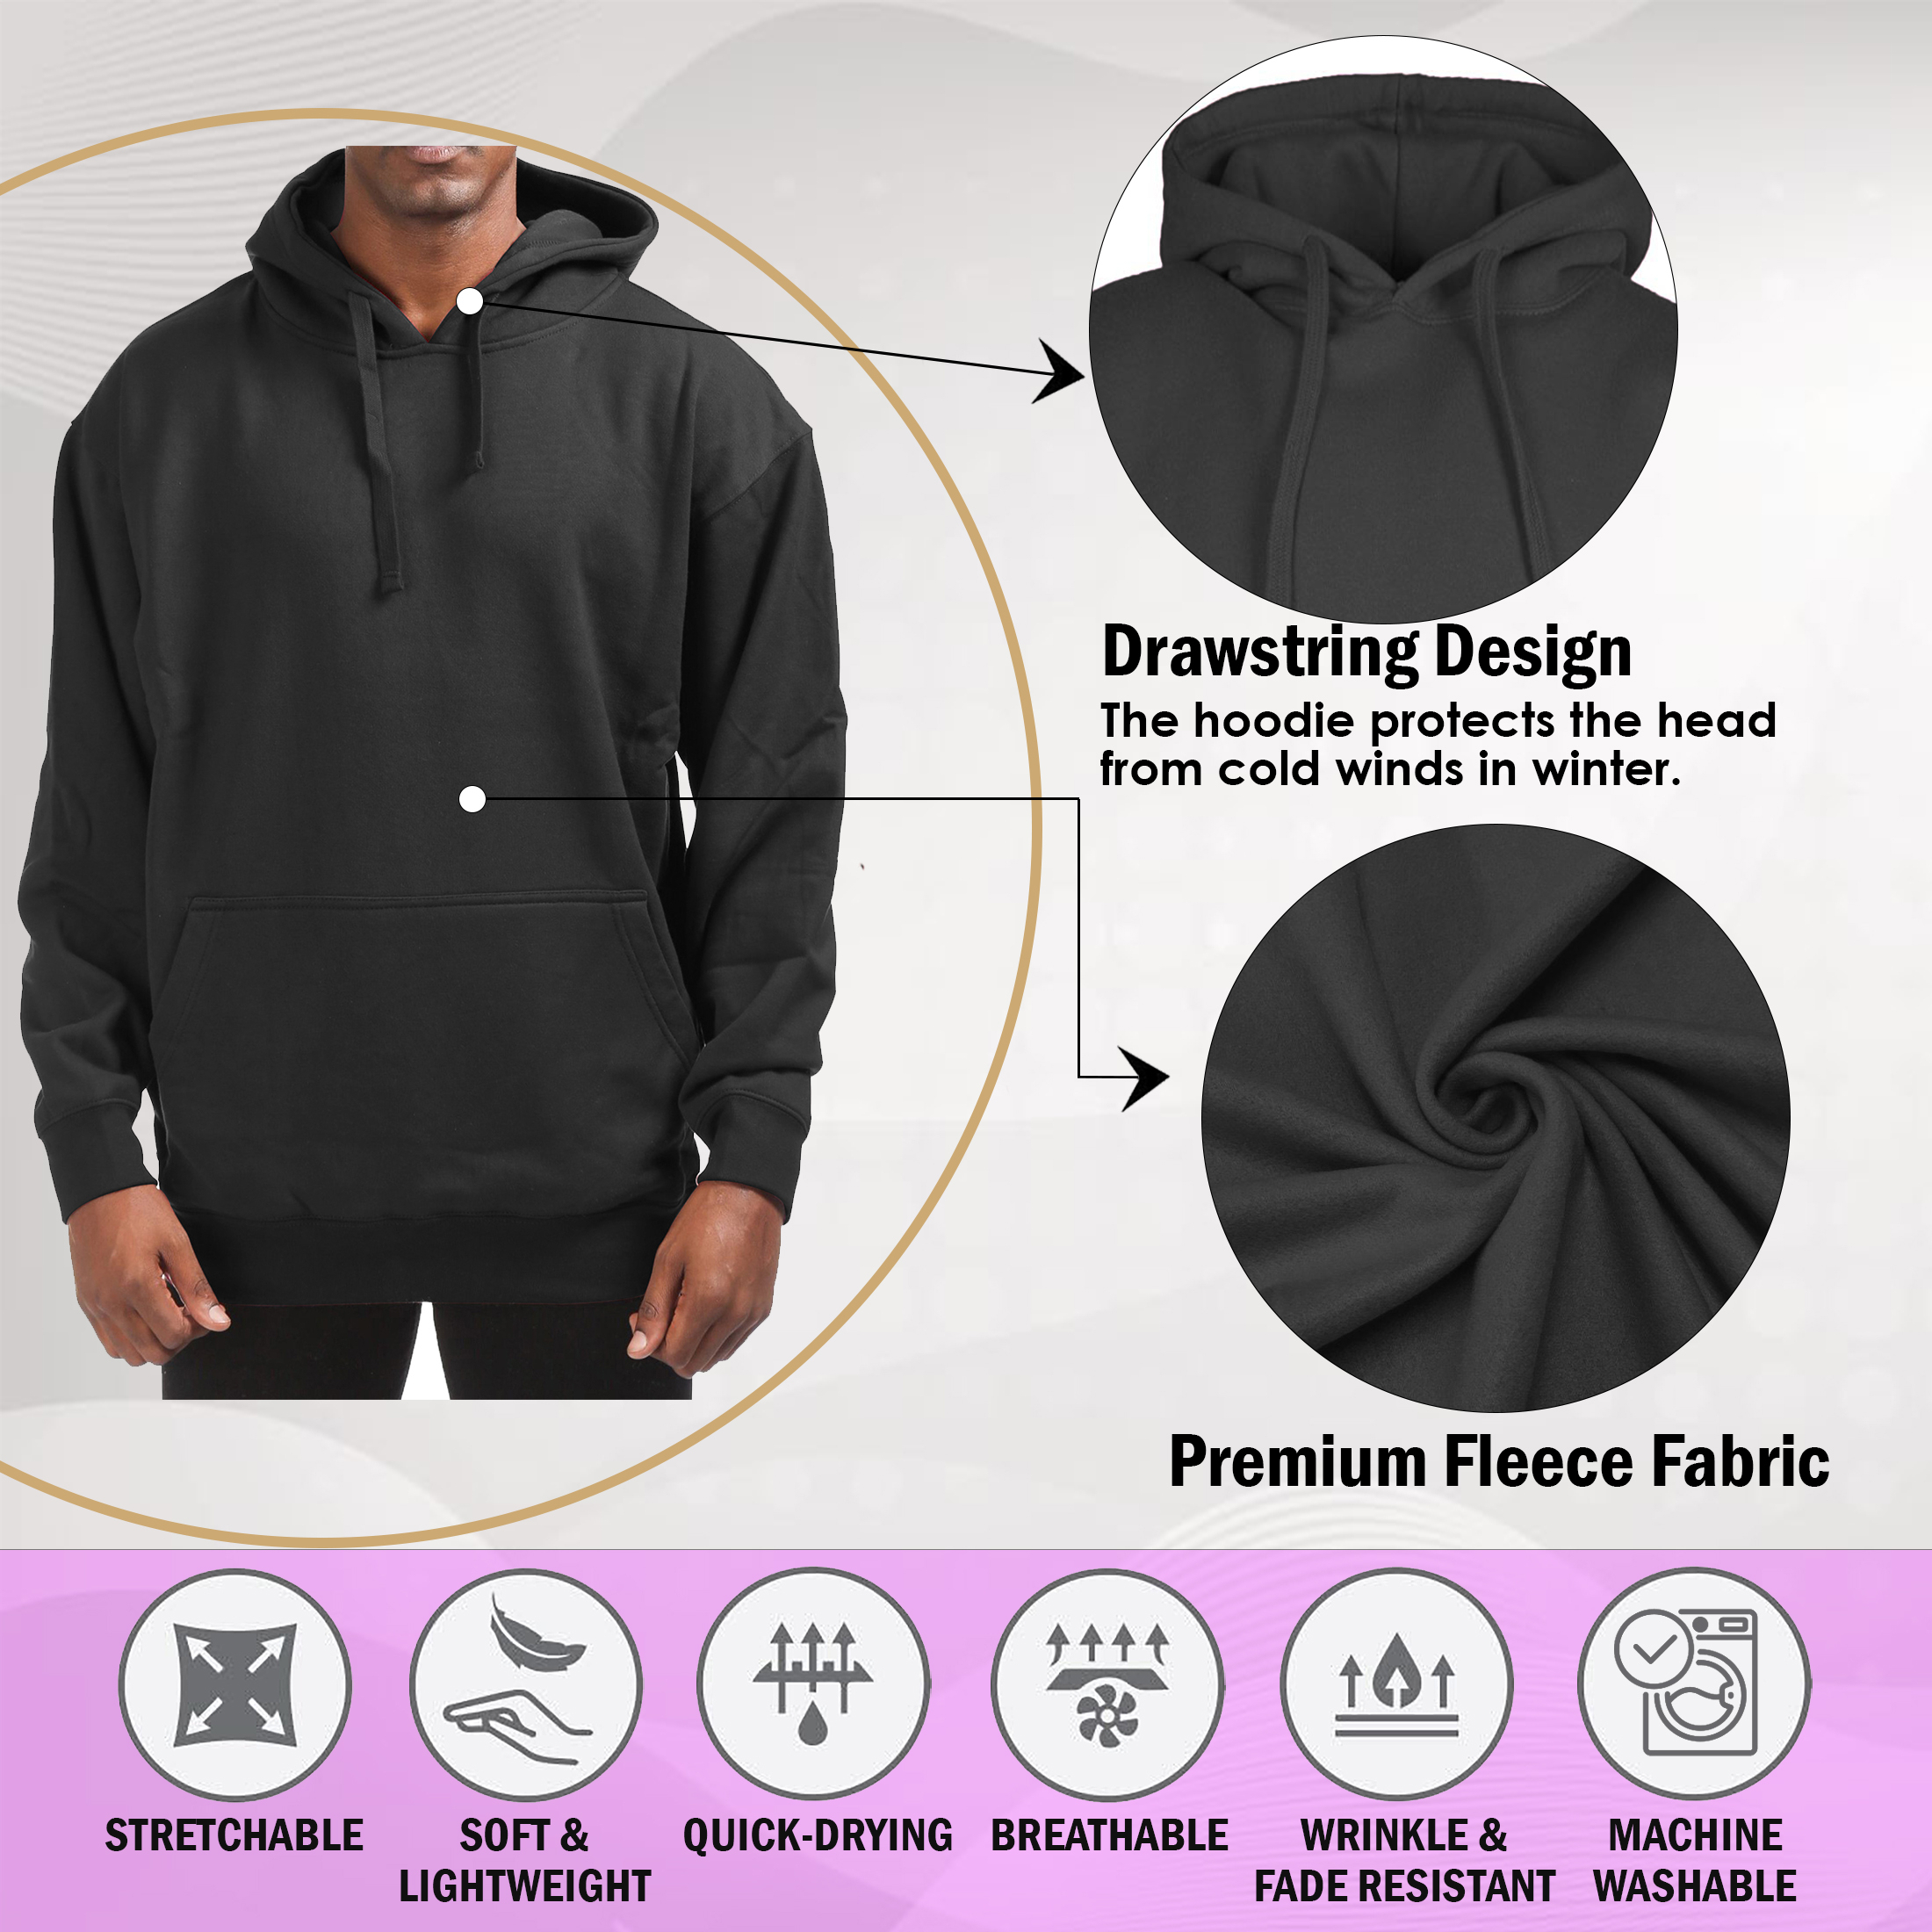 Men's Cotton-Blend Fleece Pullover Hoodie With Pocket (Big & Tall Sizes Available) - Charcoal, X-Large